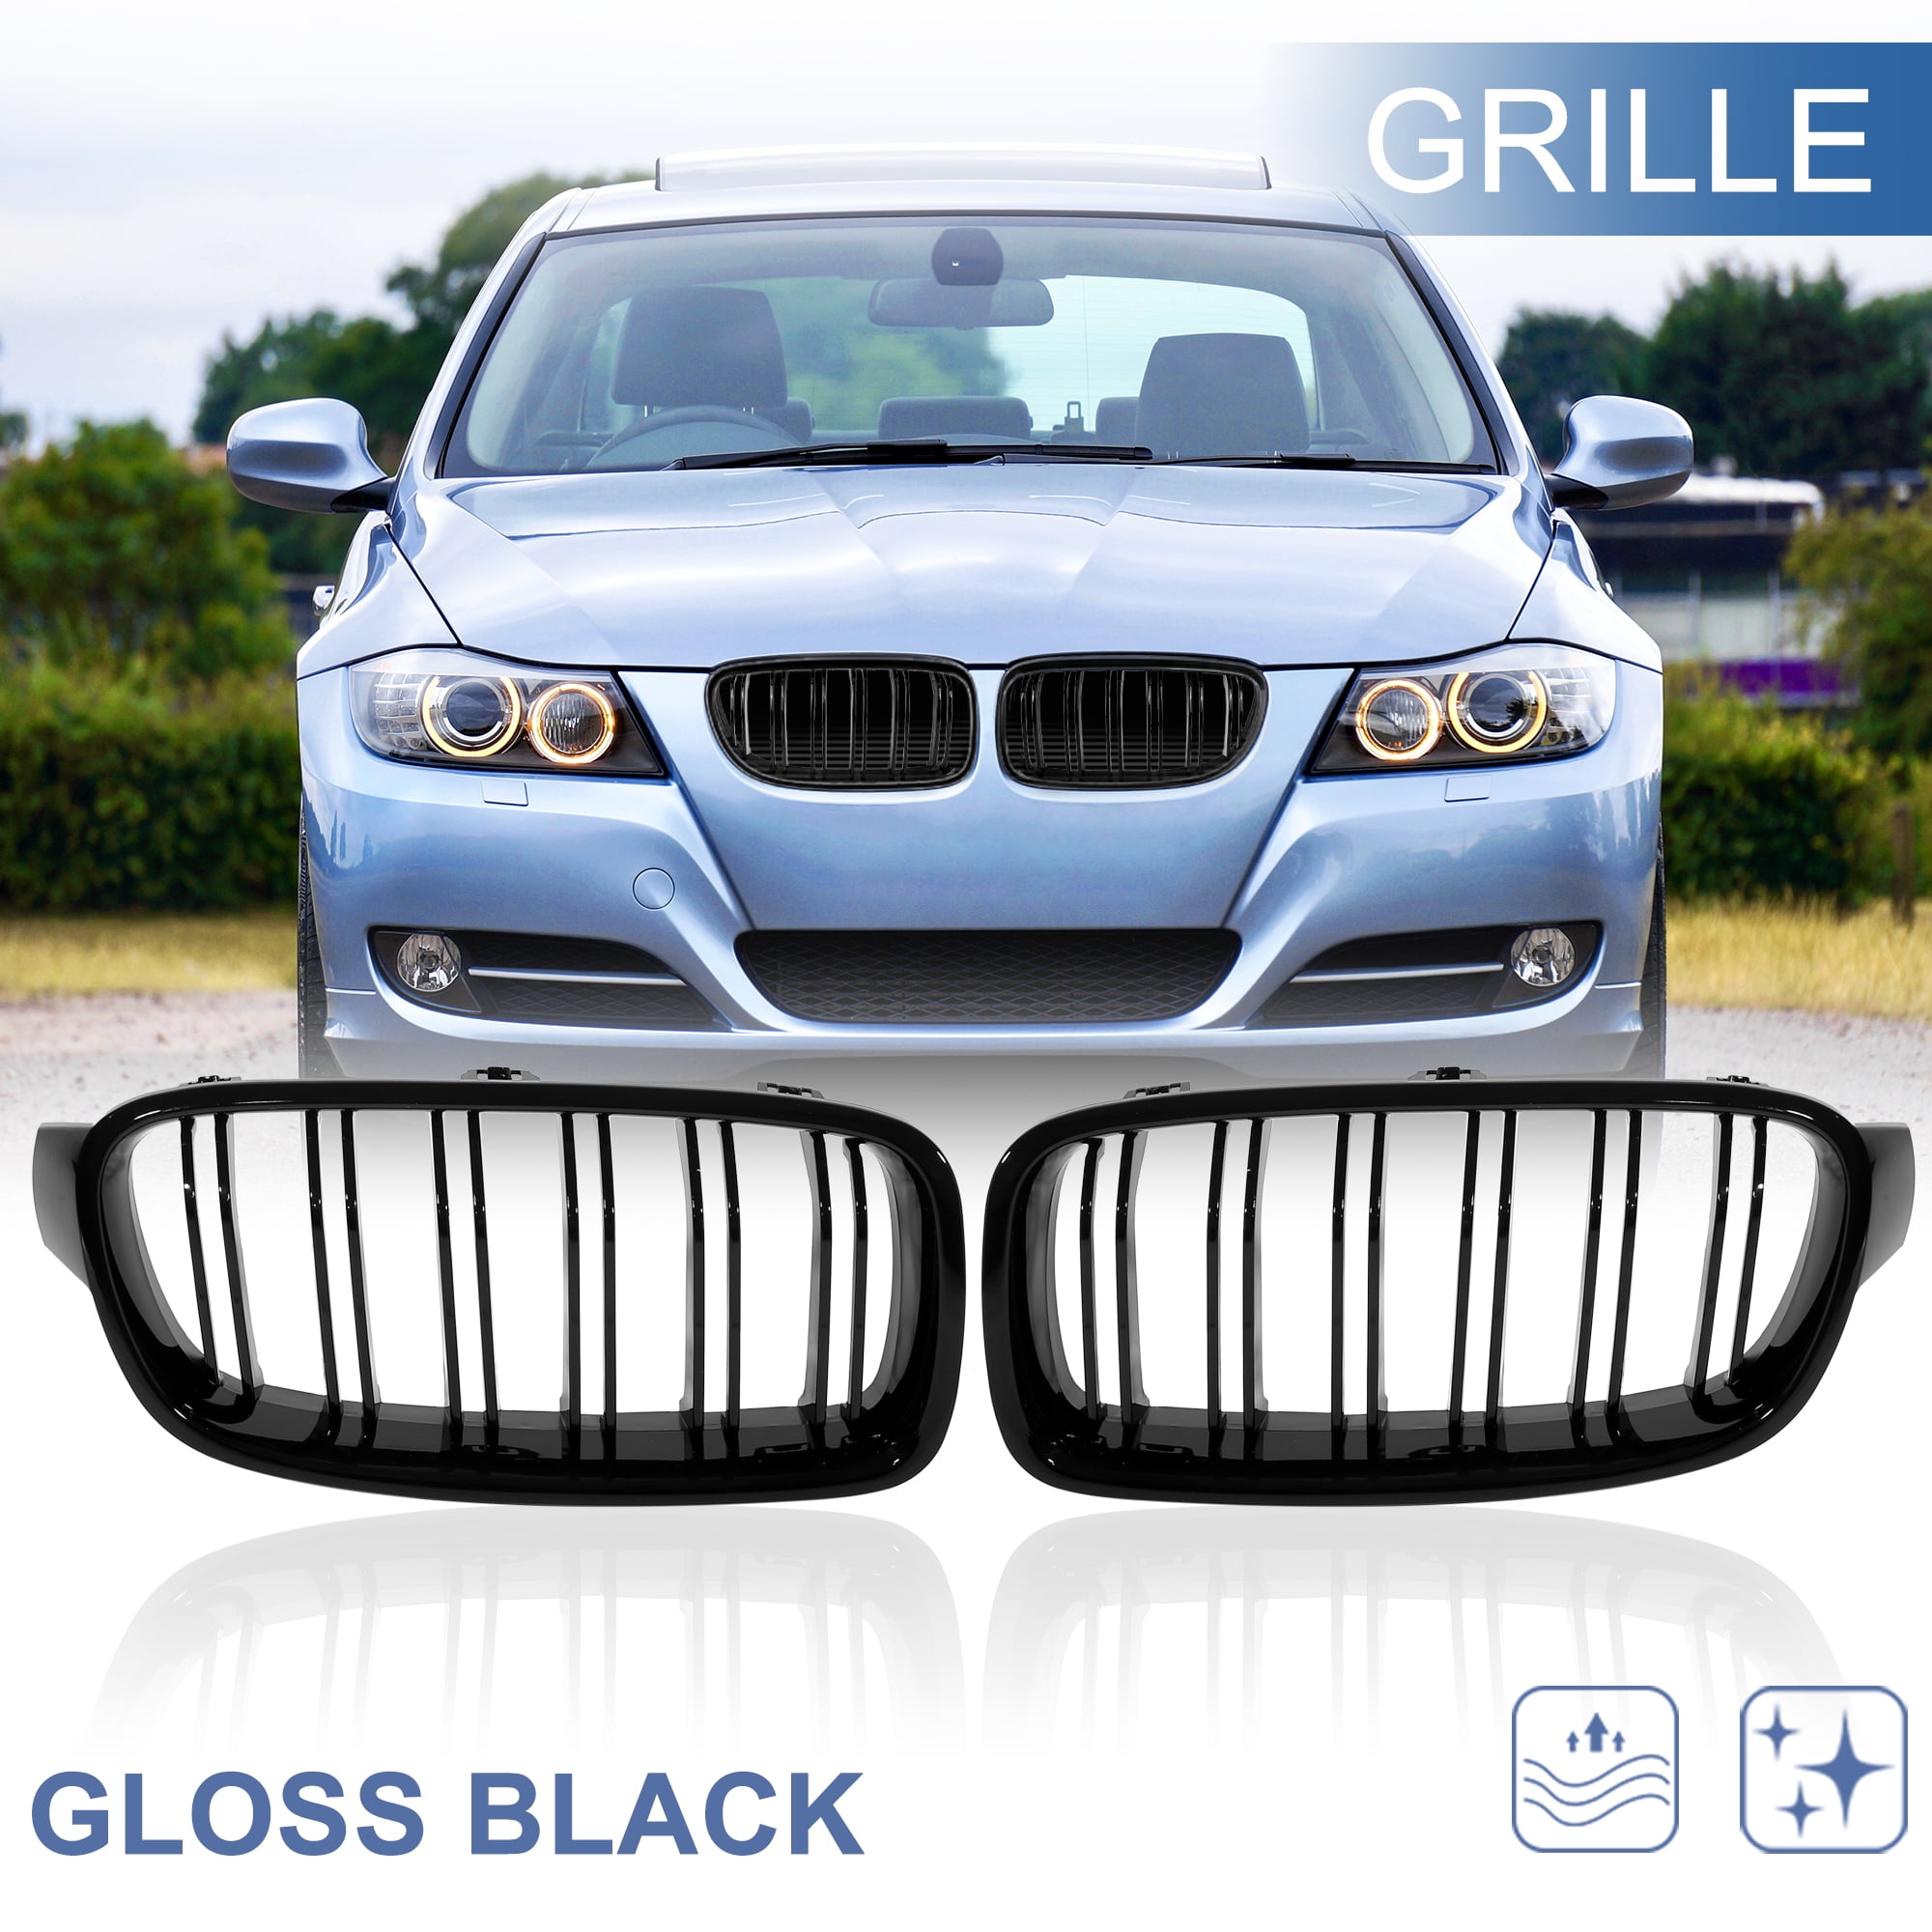 X AUTOHAUX 1 Pair Glossy Black Car Hood Kidney Bars Front Grille 4 Door for BMW F32 2013-2018